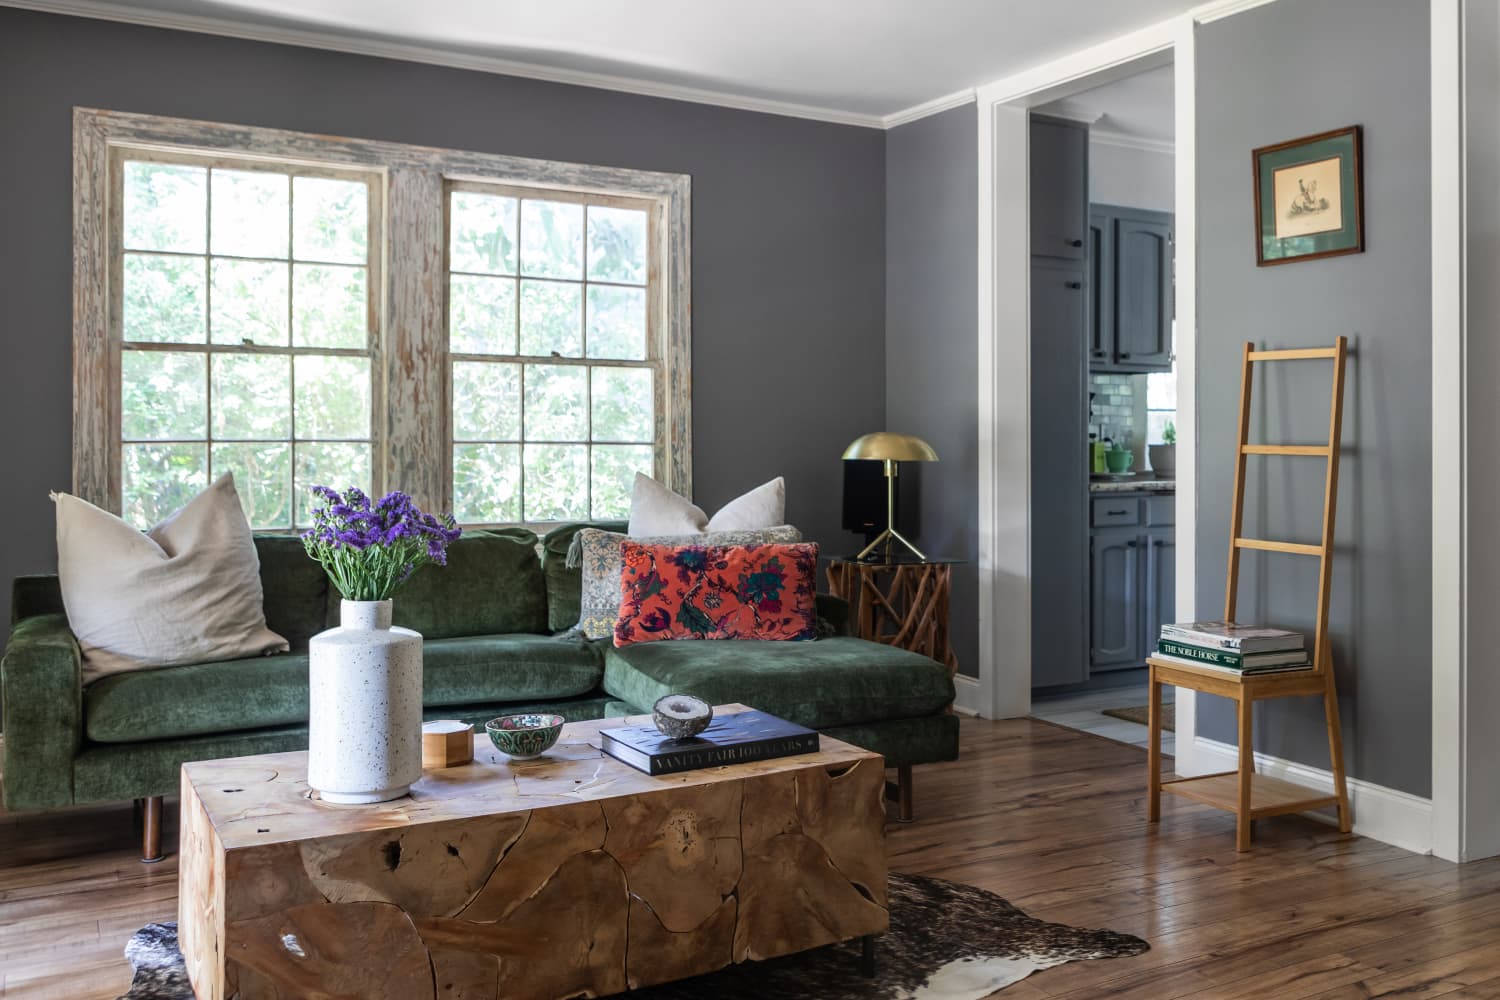 These Are The 7 Most Popular Living Room Colors of 2022 | Apartment Therapy